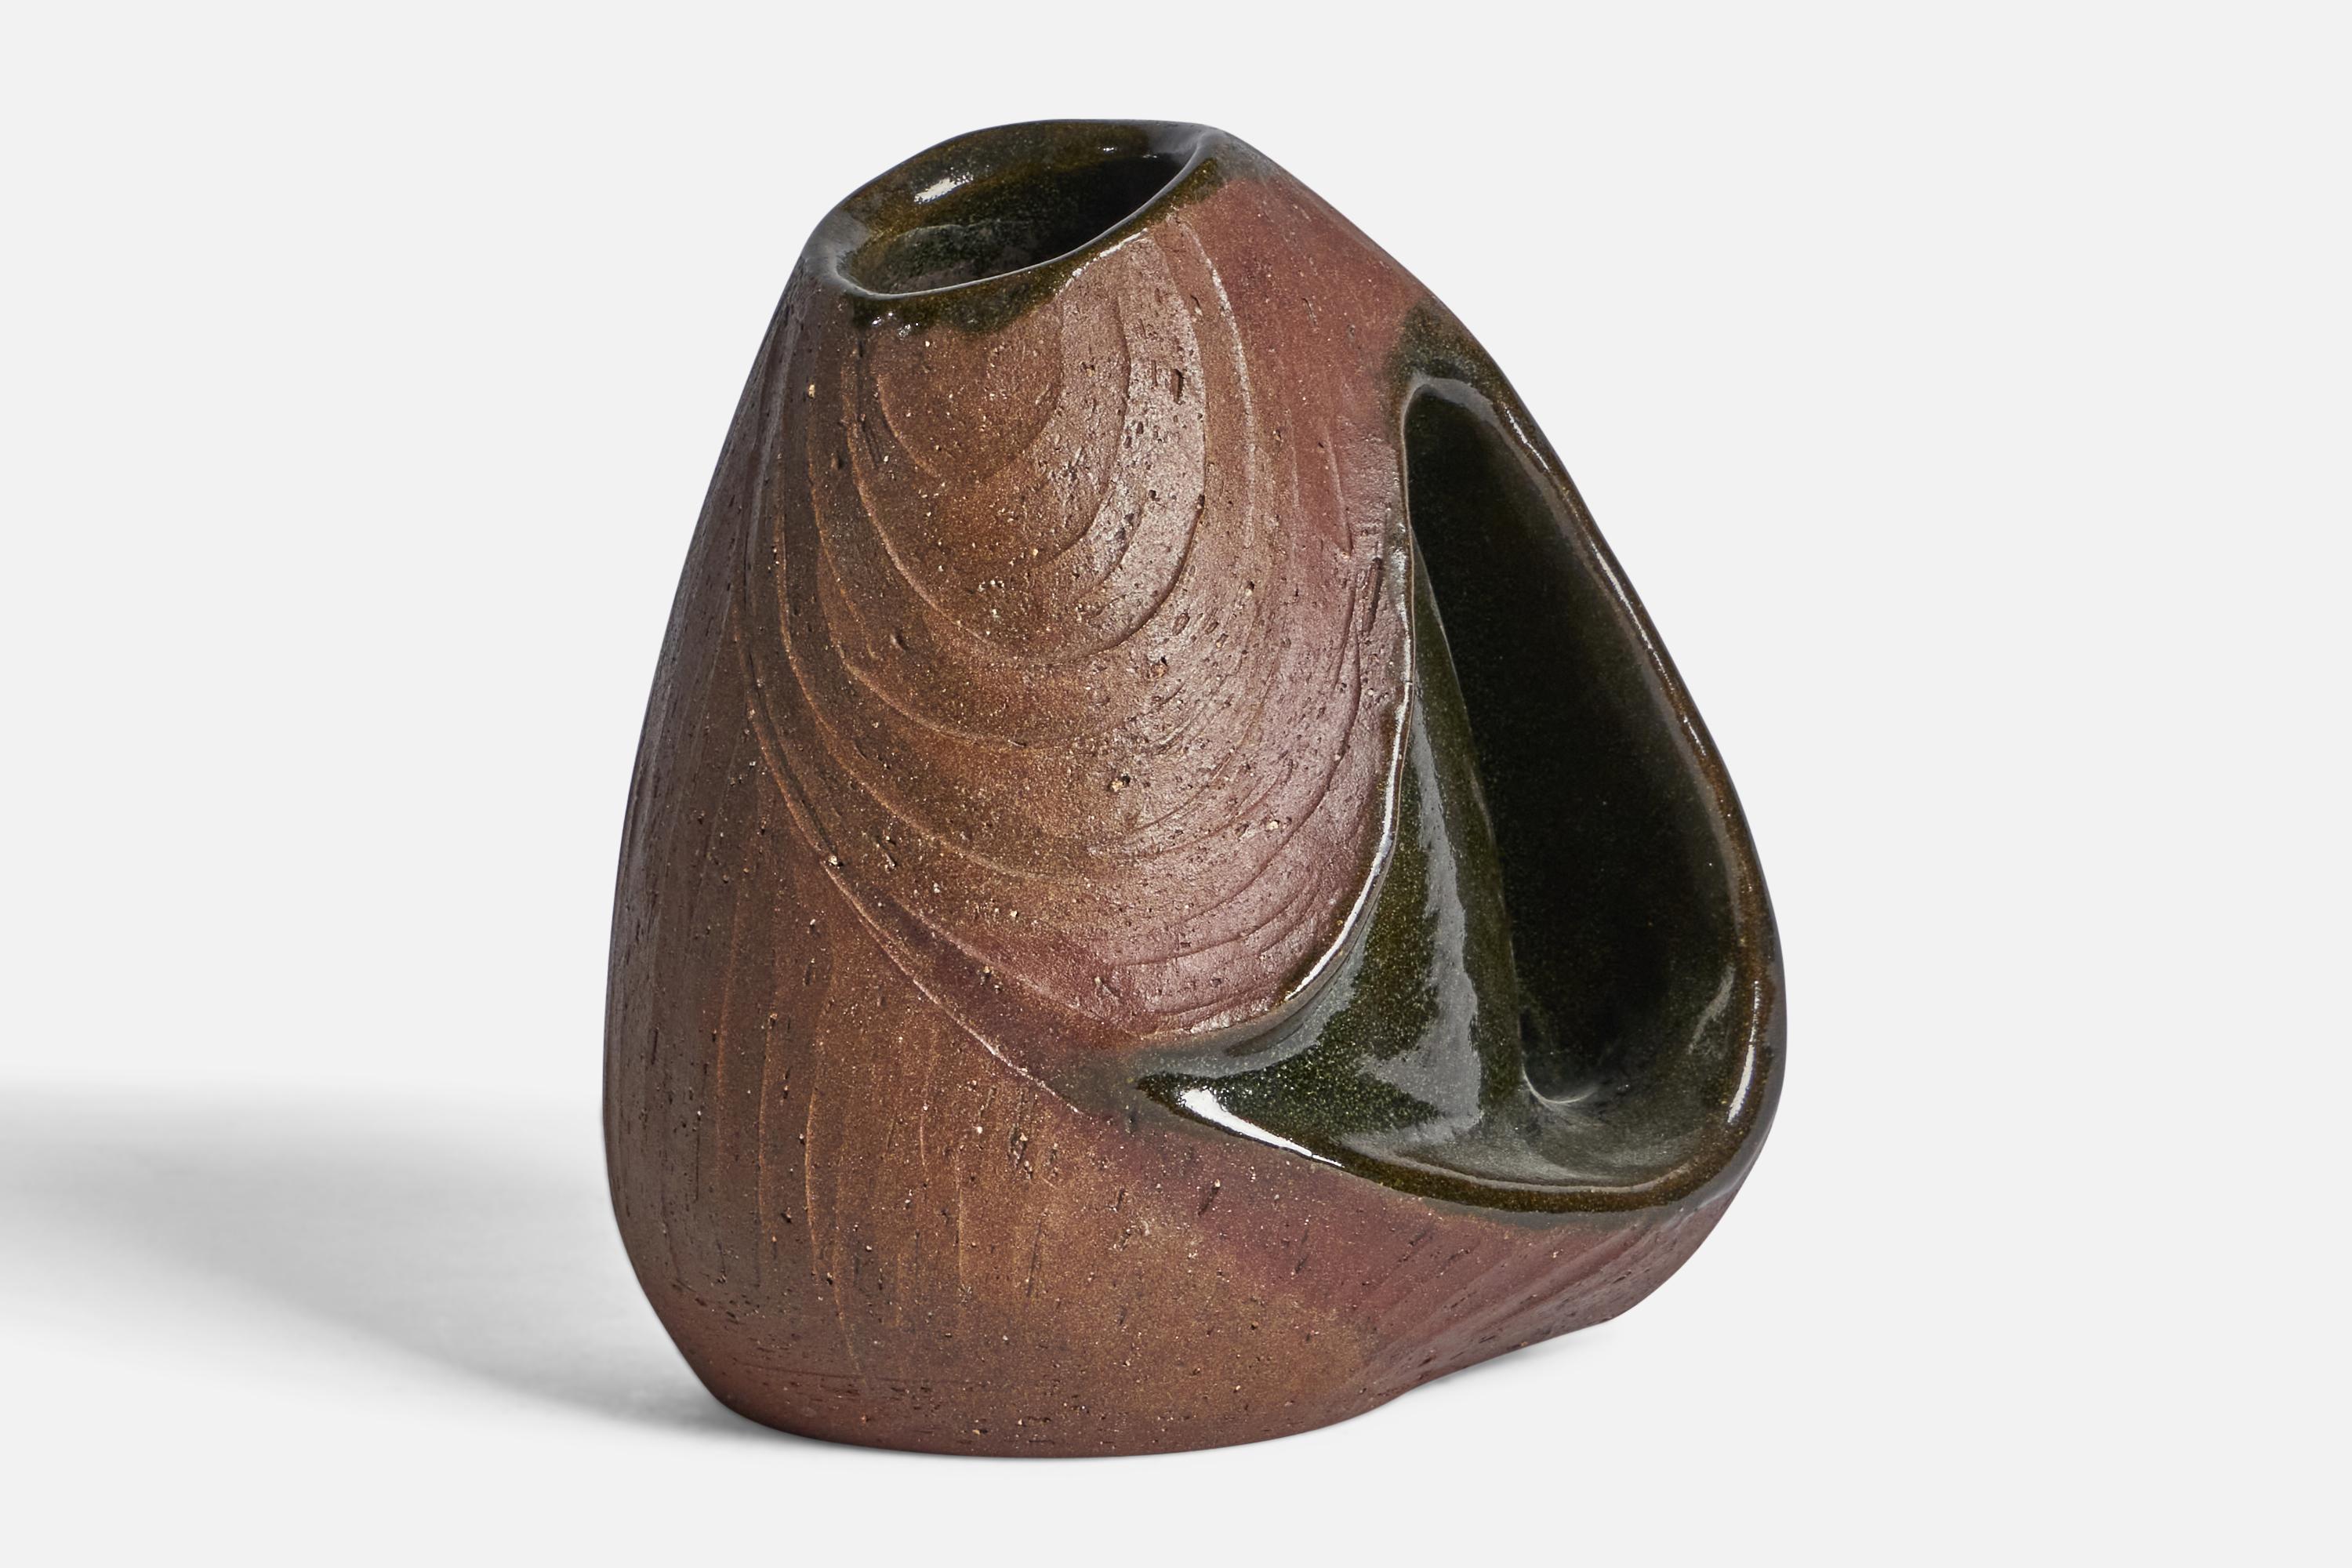 A semi-glazed brown and green stoneware vase designed and produced in Denmark, c. 1970s.